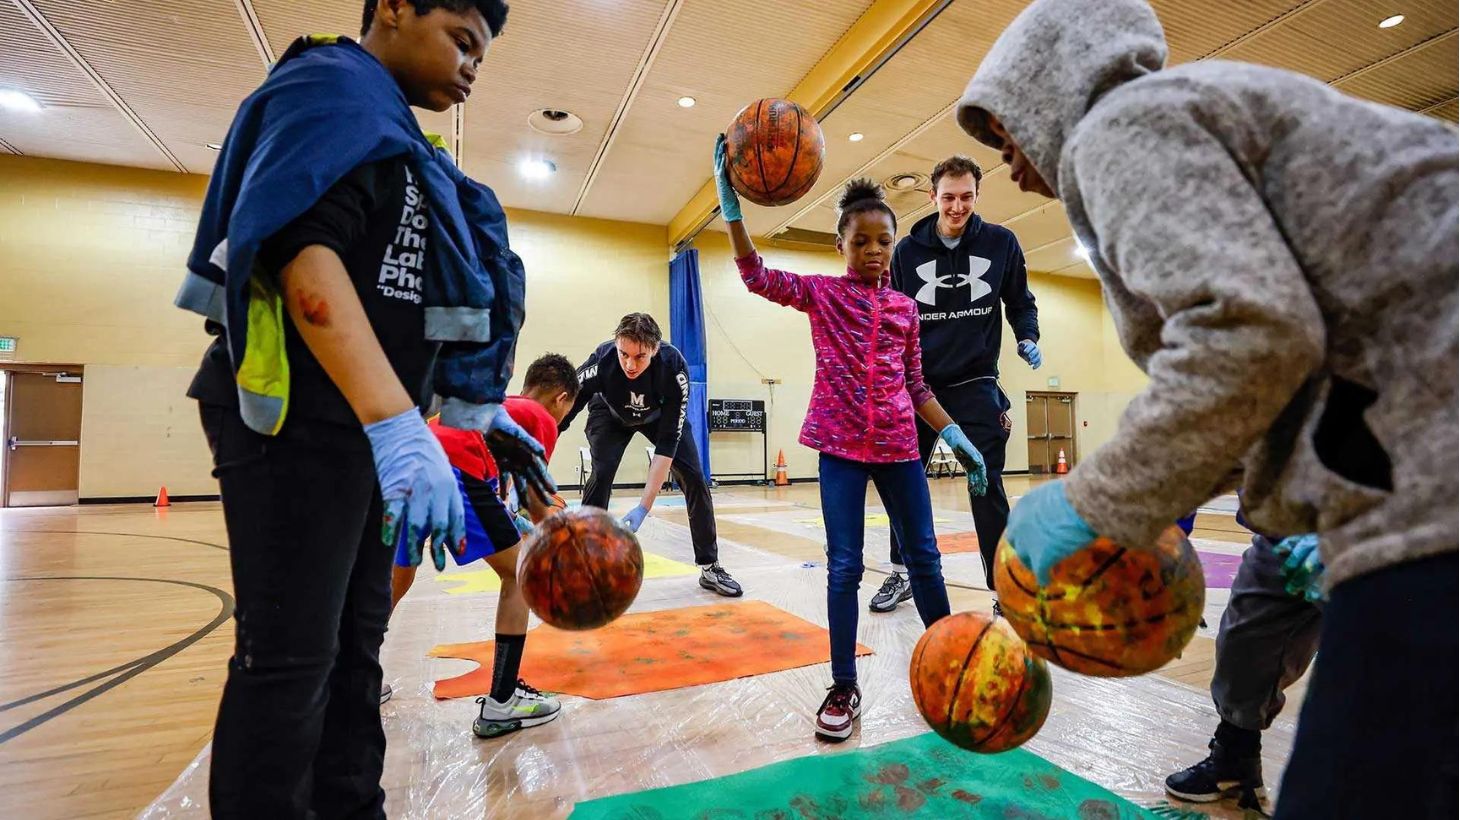 UMD basketball players and art professor help children to paint with paint-smeared basketballs in a gym.